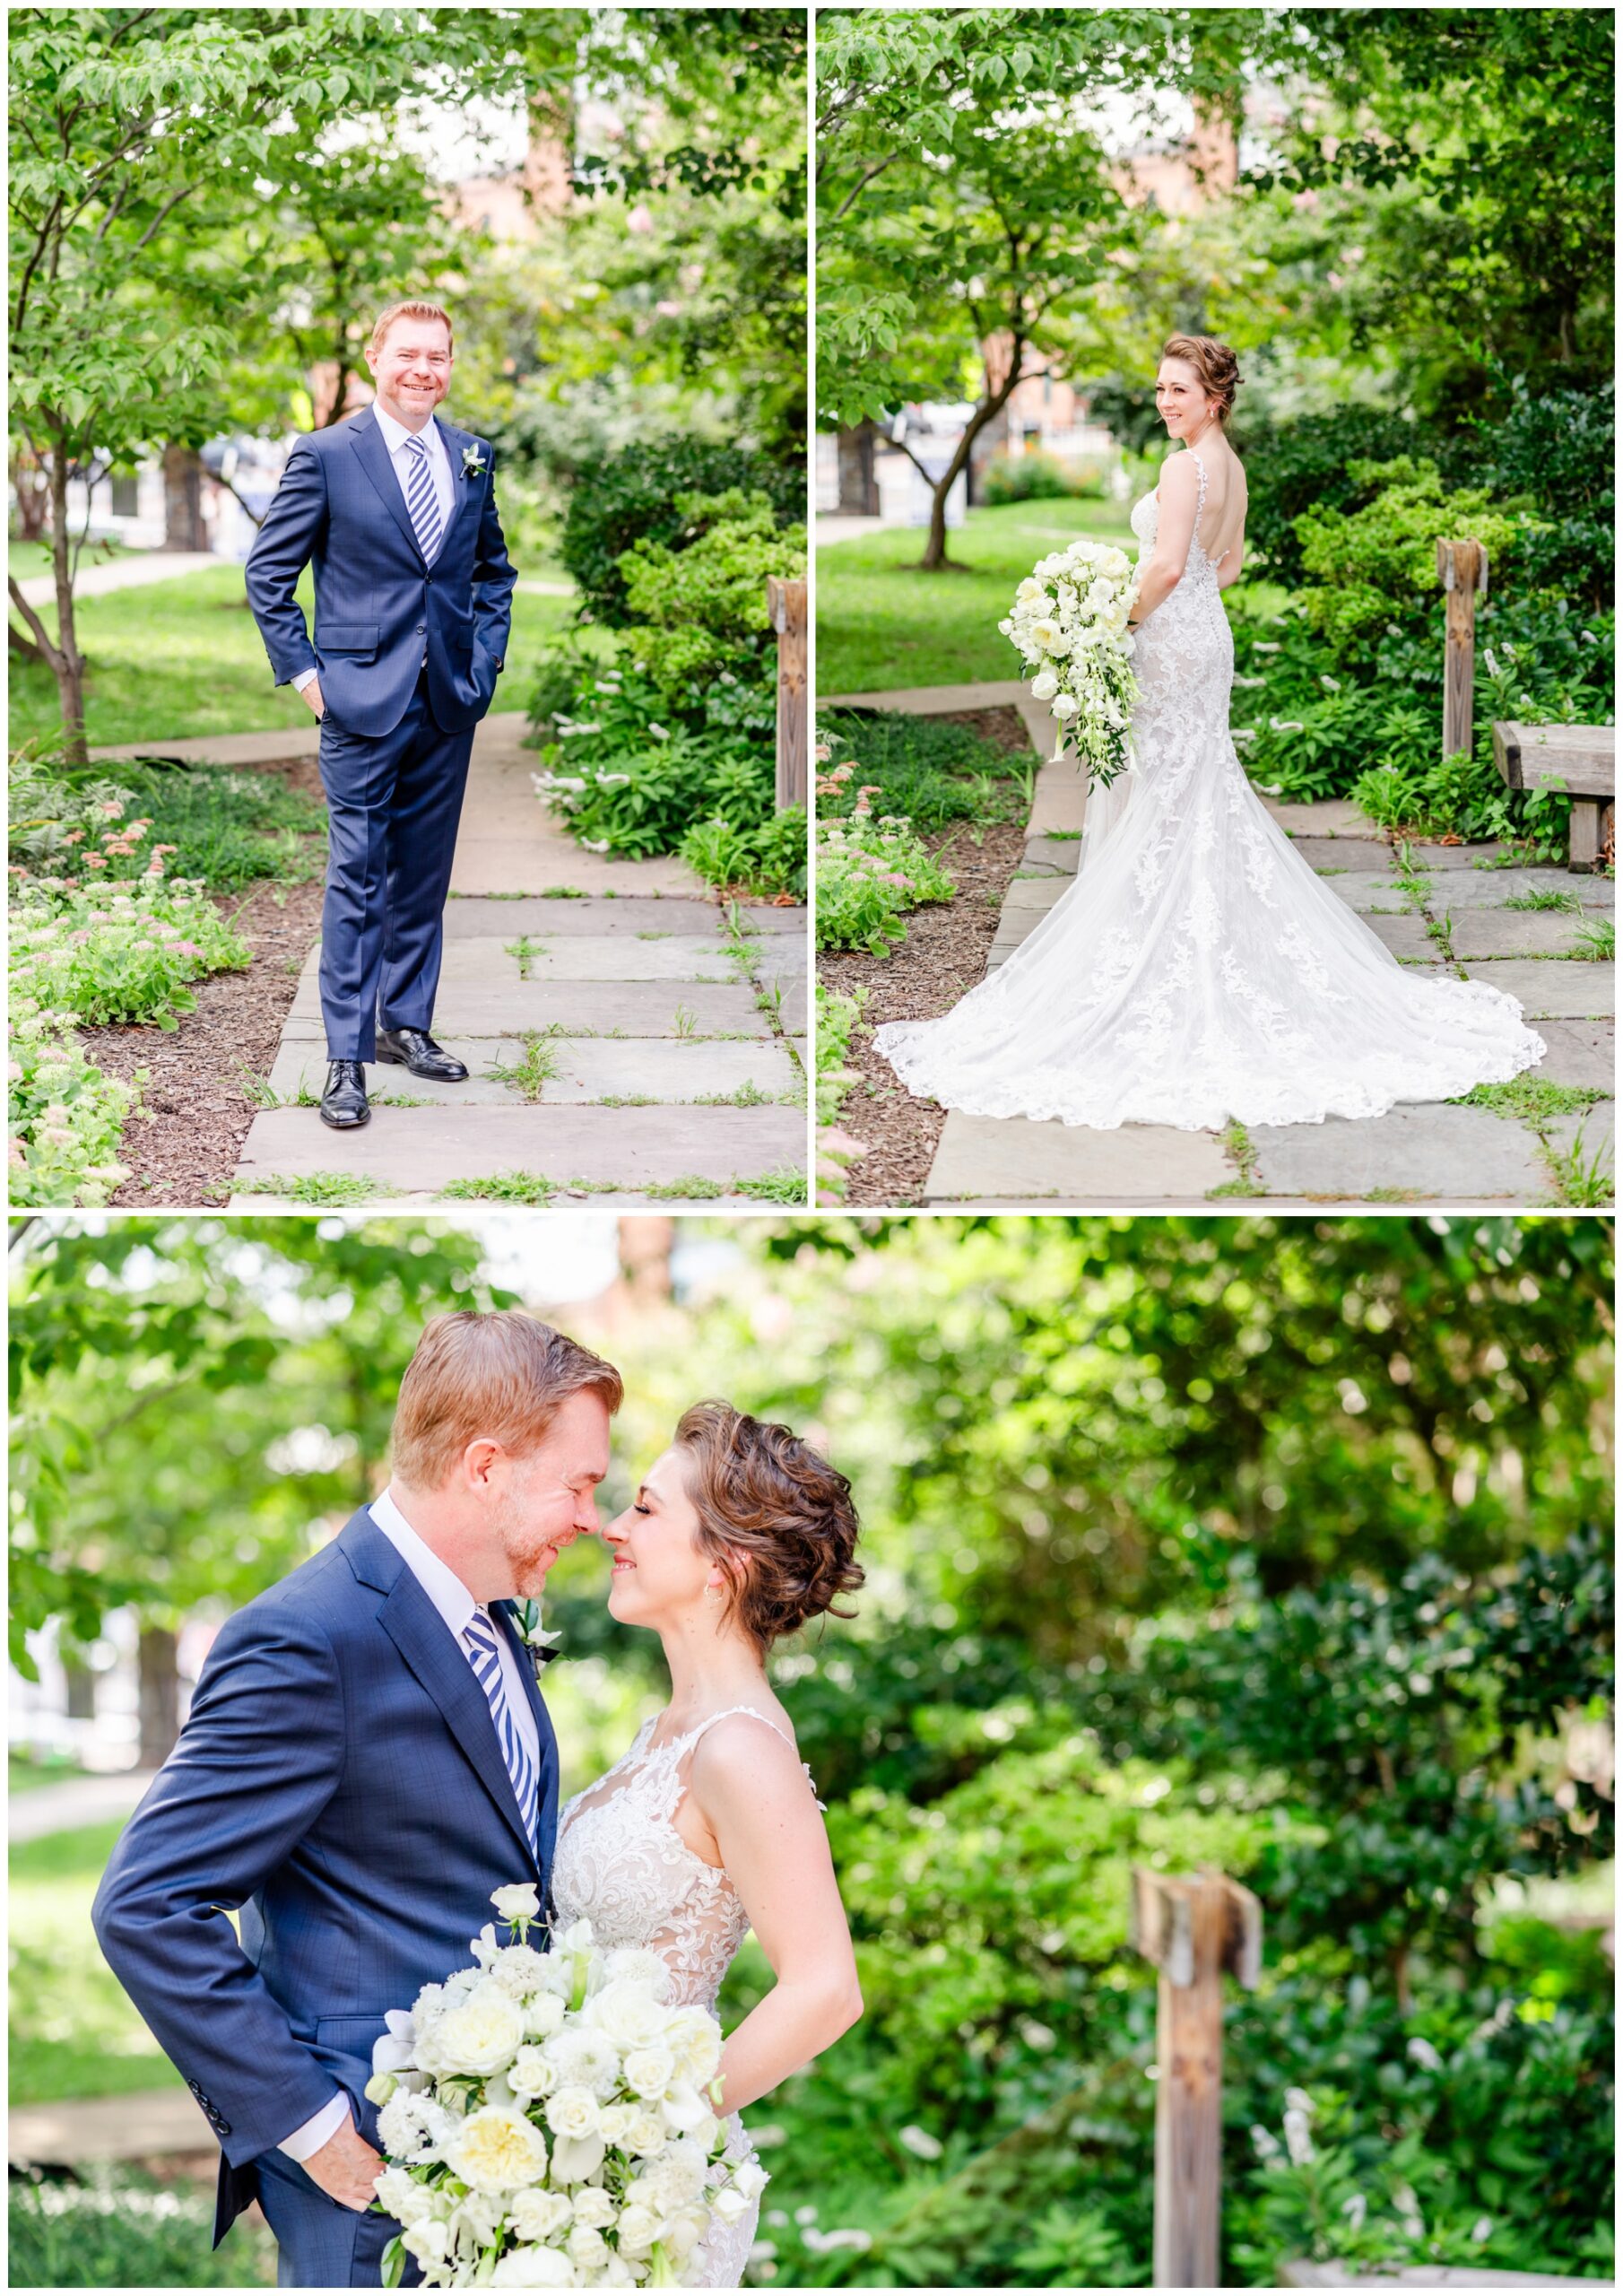 romantic Ritz Carlton Georgetown wedding, summer wedding aesthetic, green and white aesthetic, summer D.C. wedding, D.C. wedding venues, Ritz Carlton wedding, Washington D.C. wedding, romantic wedding aesthetic, Georgetown wedding, Rachel E.H. Photography, D.C. photographer, bride smiling, groom smiling, couple smiling at each other